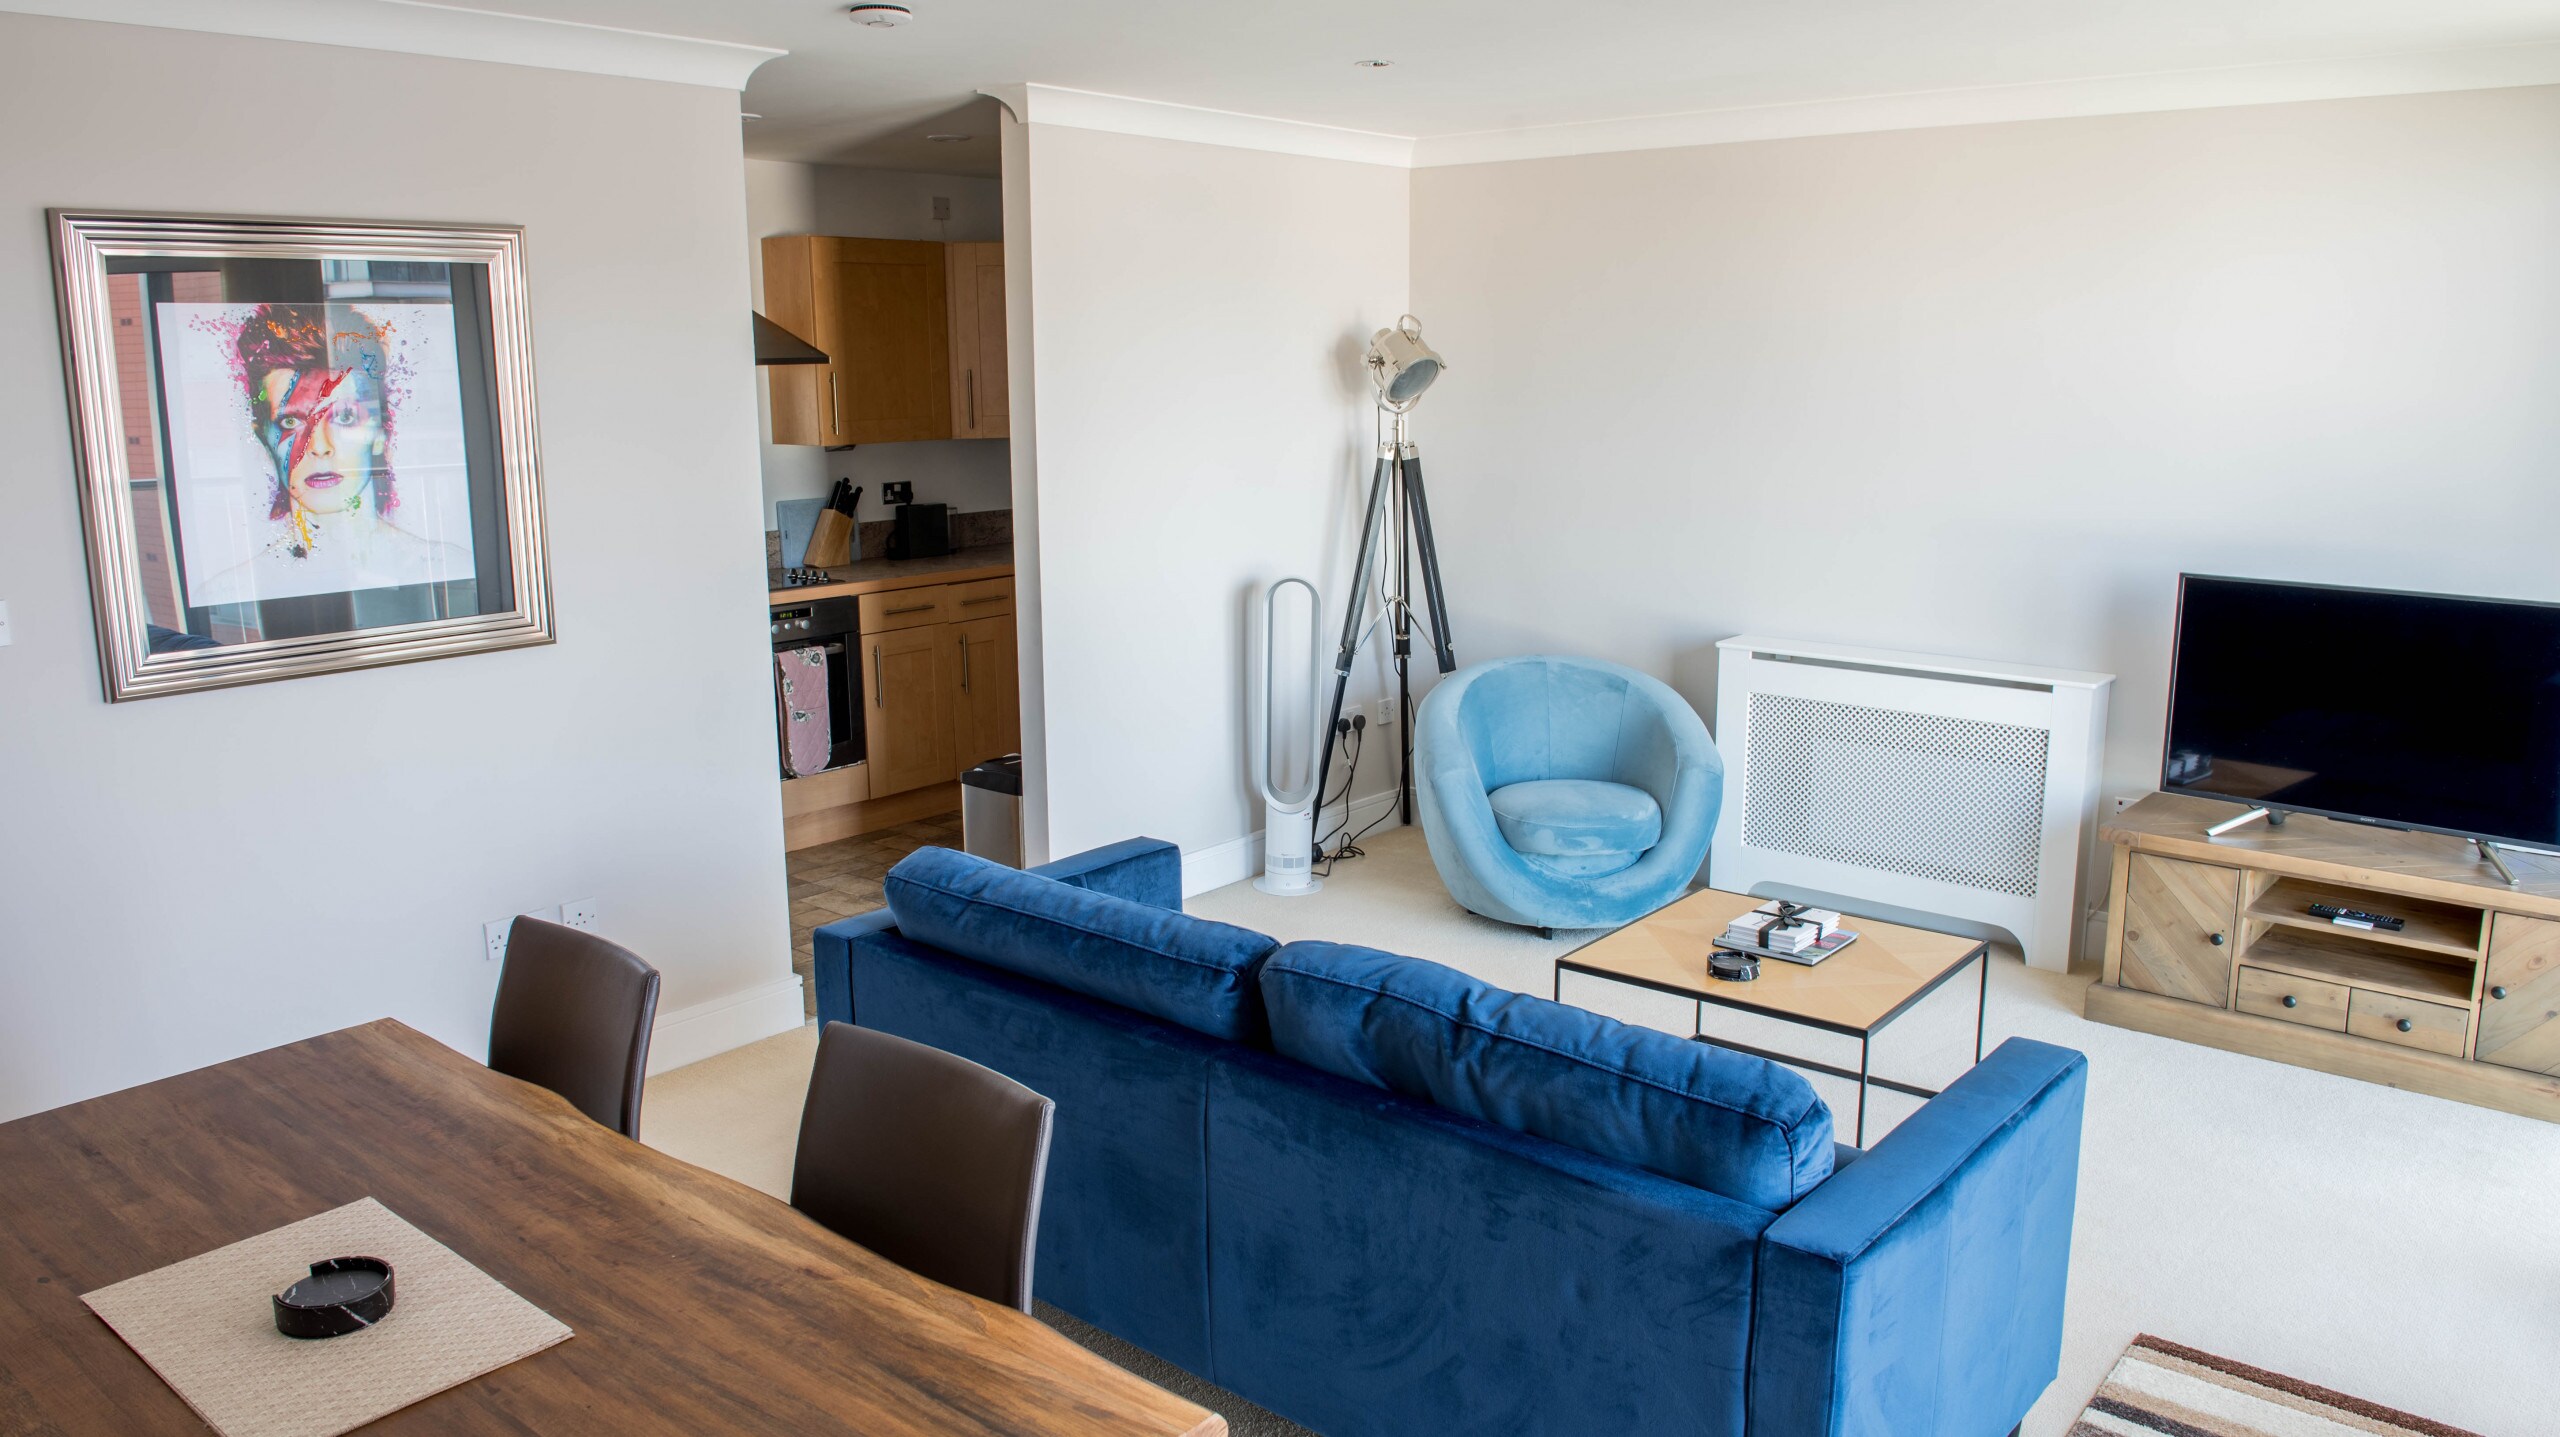 Property Image 2 - 2 Bedroom / 2 Bathroom, Ipswich Waterfront with balcony and marina views. Allocated parking space (indoor)